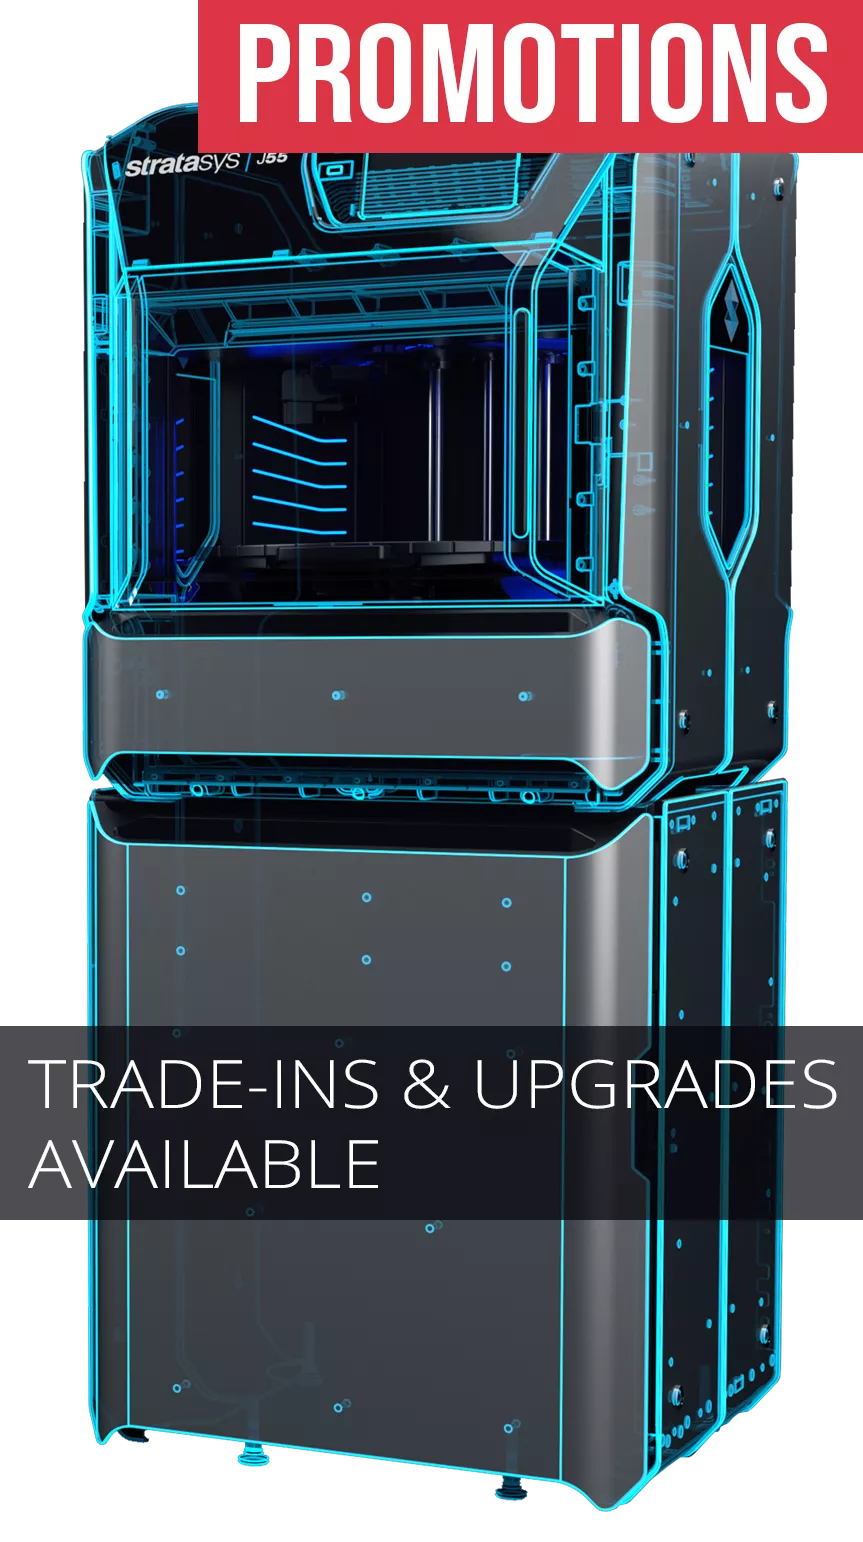 Learn How You Can Save Thousands on the Purchase of a Stratasys 3D Printer!